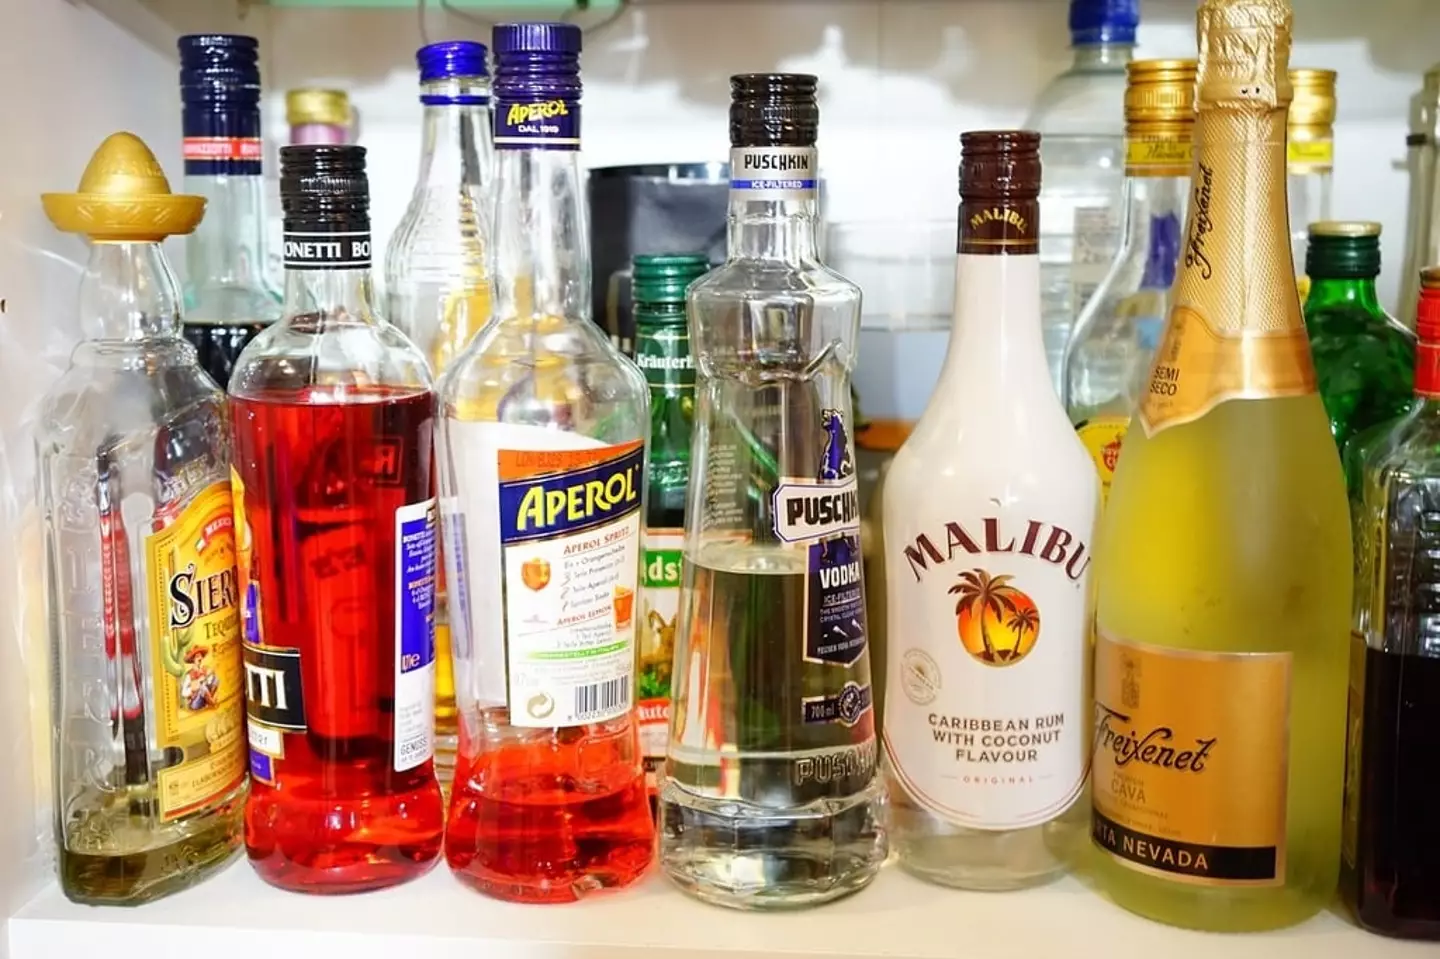 Alcohol is very expensive in Indonesia which is why some opt to make their own.